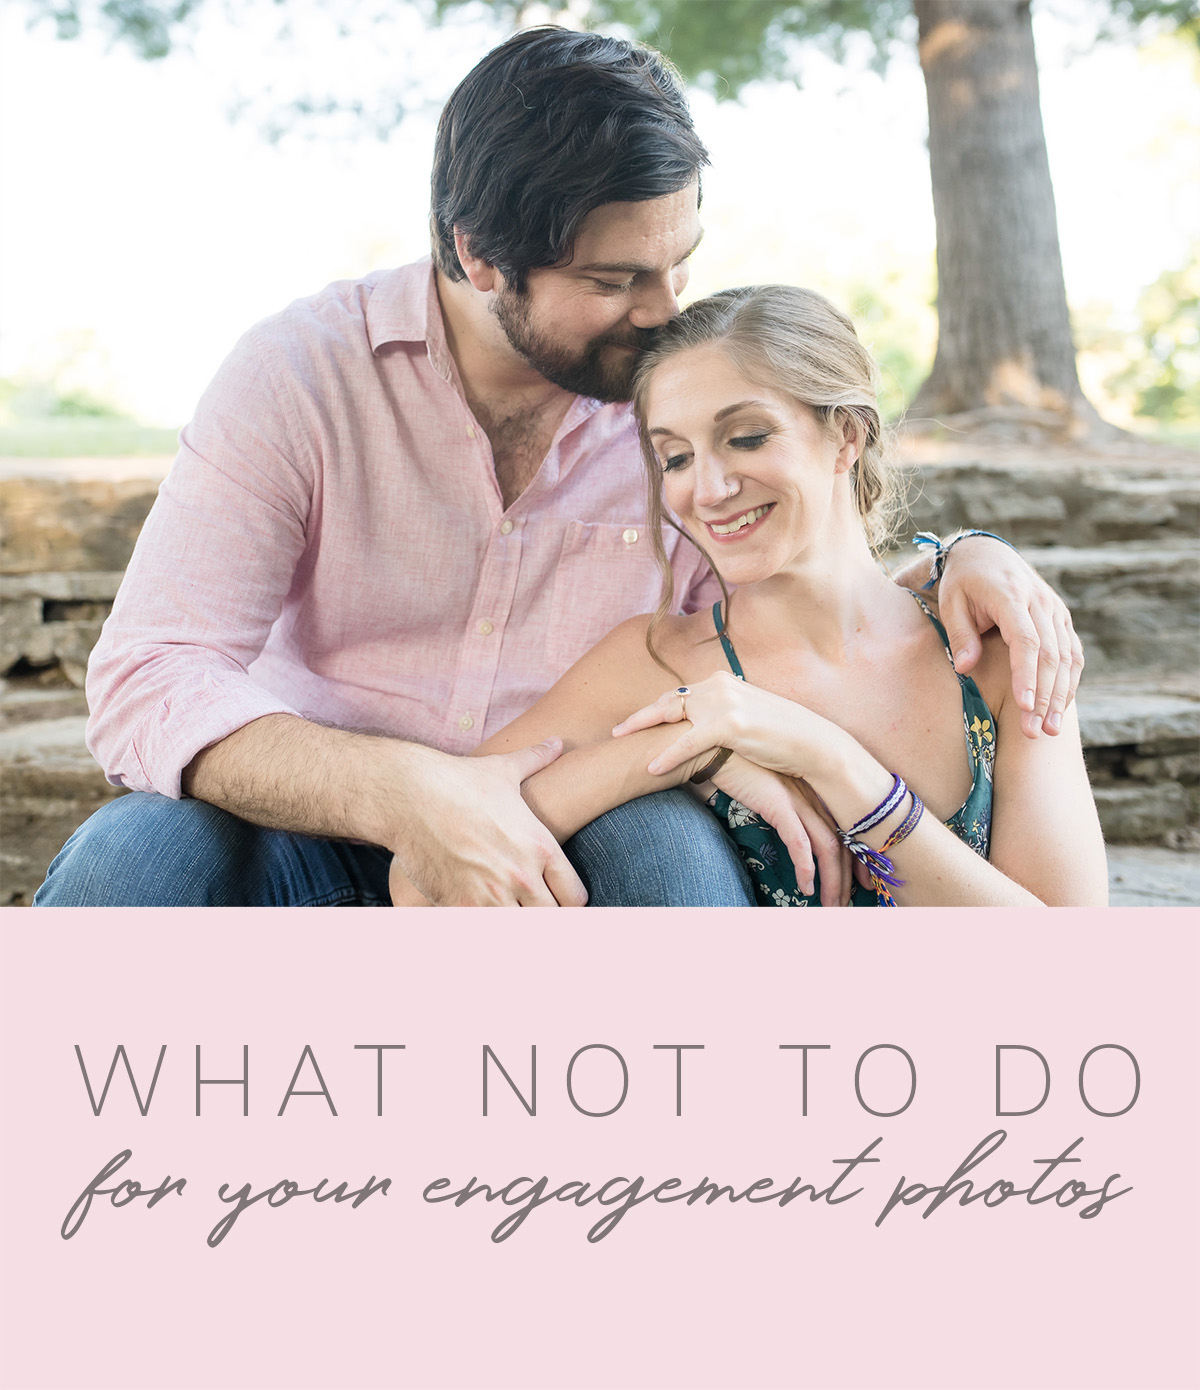 Sandra Grunzinger Photography, Tips for getting the most out of your engagement session